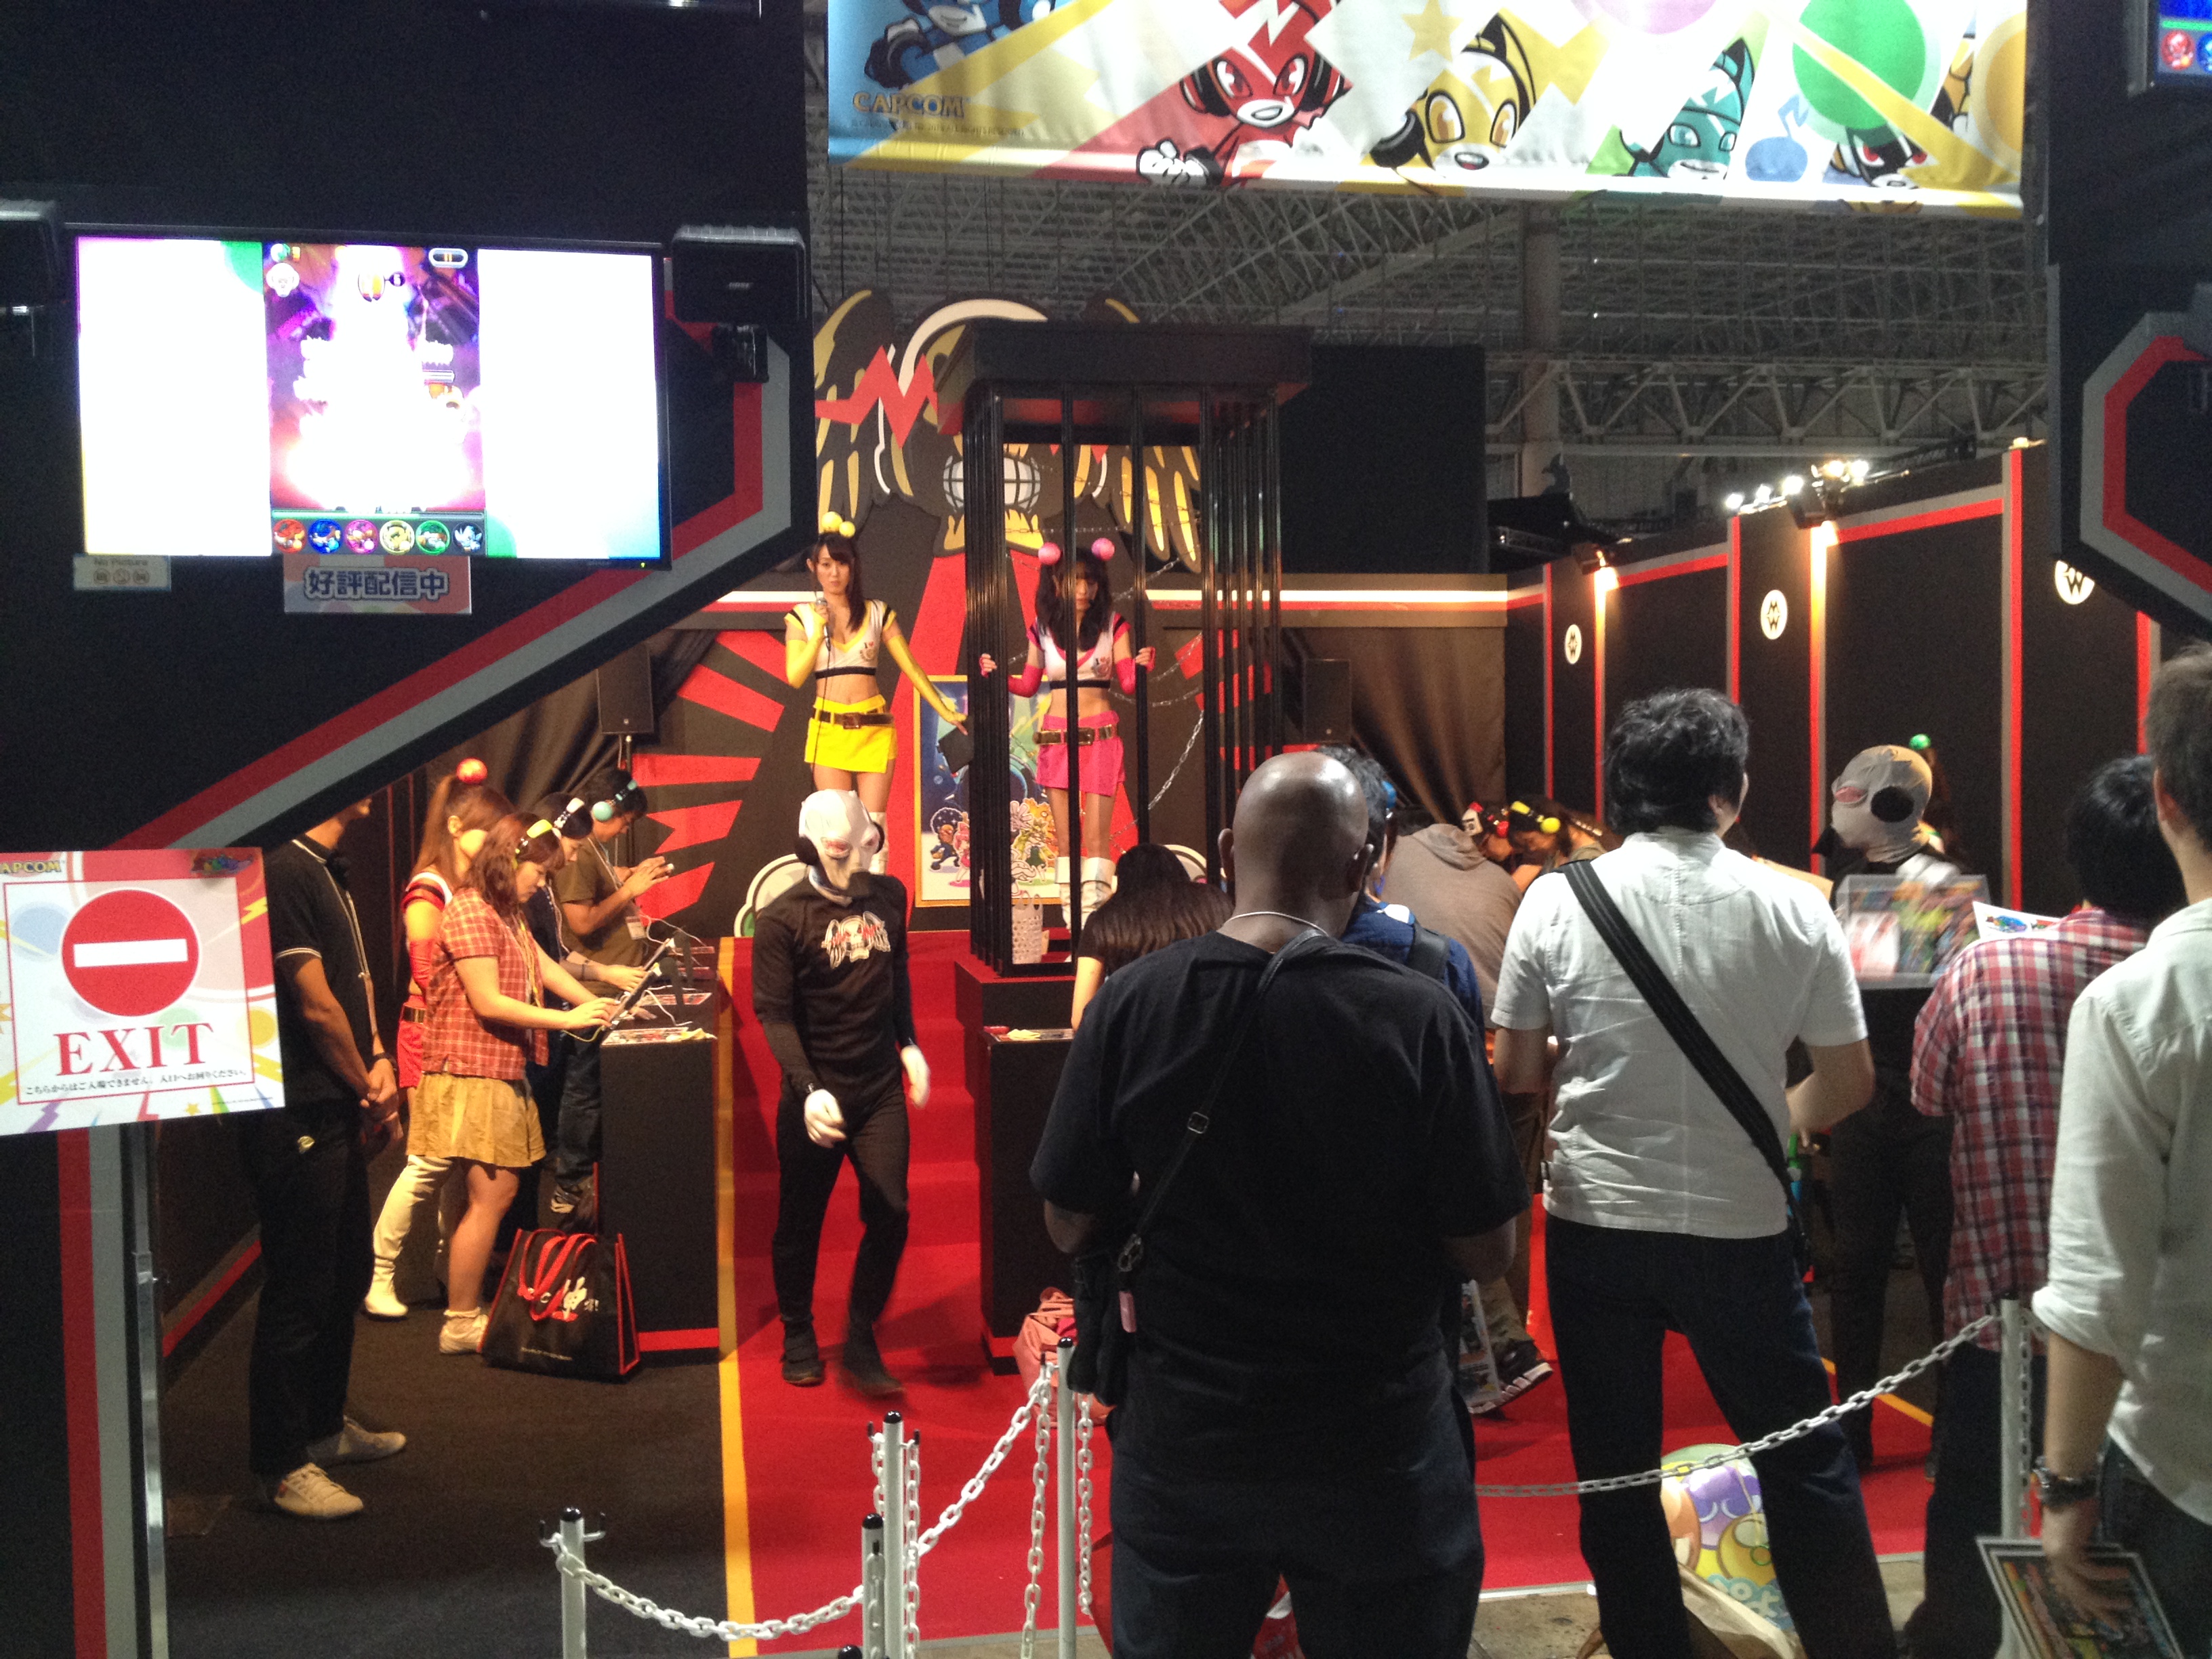 Some interesting Tokyo Game Show action